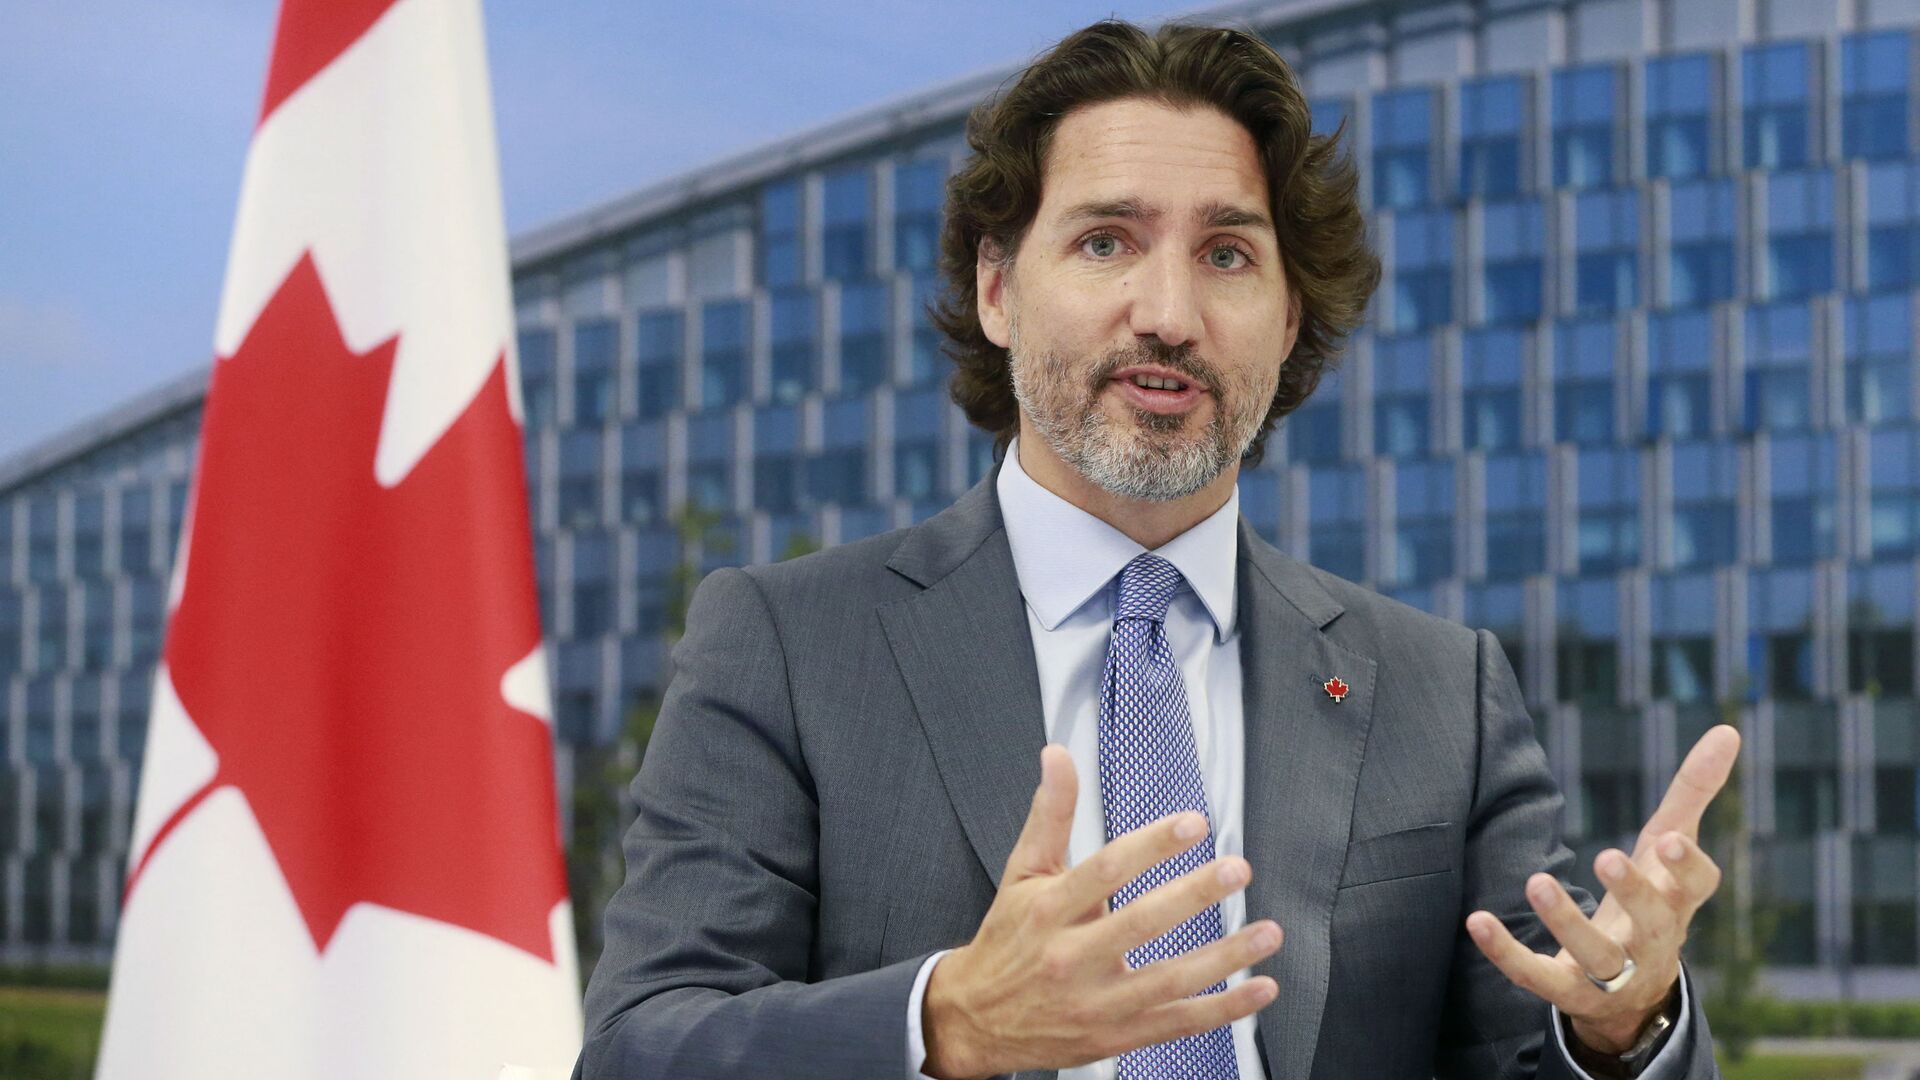 Canada's Prime Minister Justin Trudeau  speaks to the NATO Secretary General during a NATO summit at the North Atlantic Treaty Organization (NATO) headquarters in Brussels on June 14, 2021.  - Sputnik International, 1920, 22.03.2022